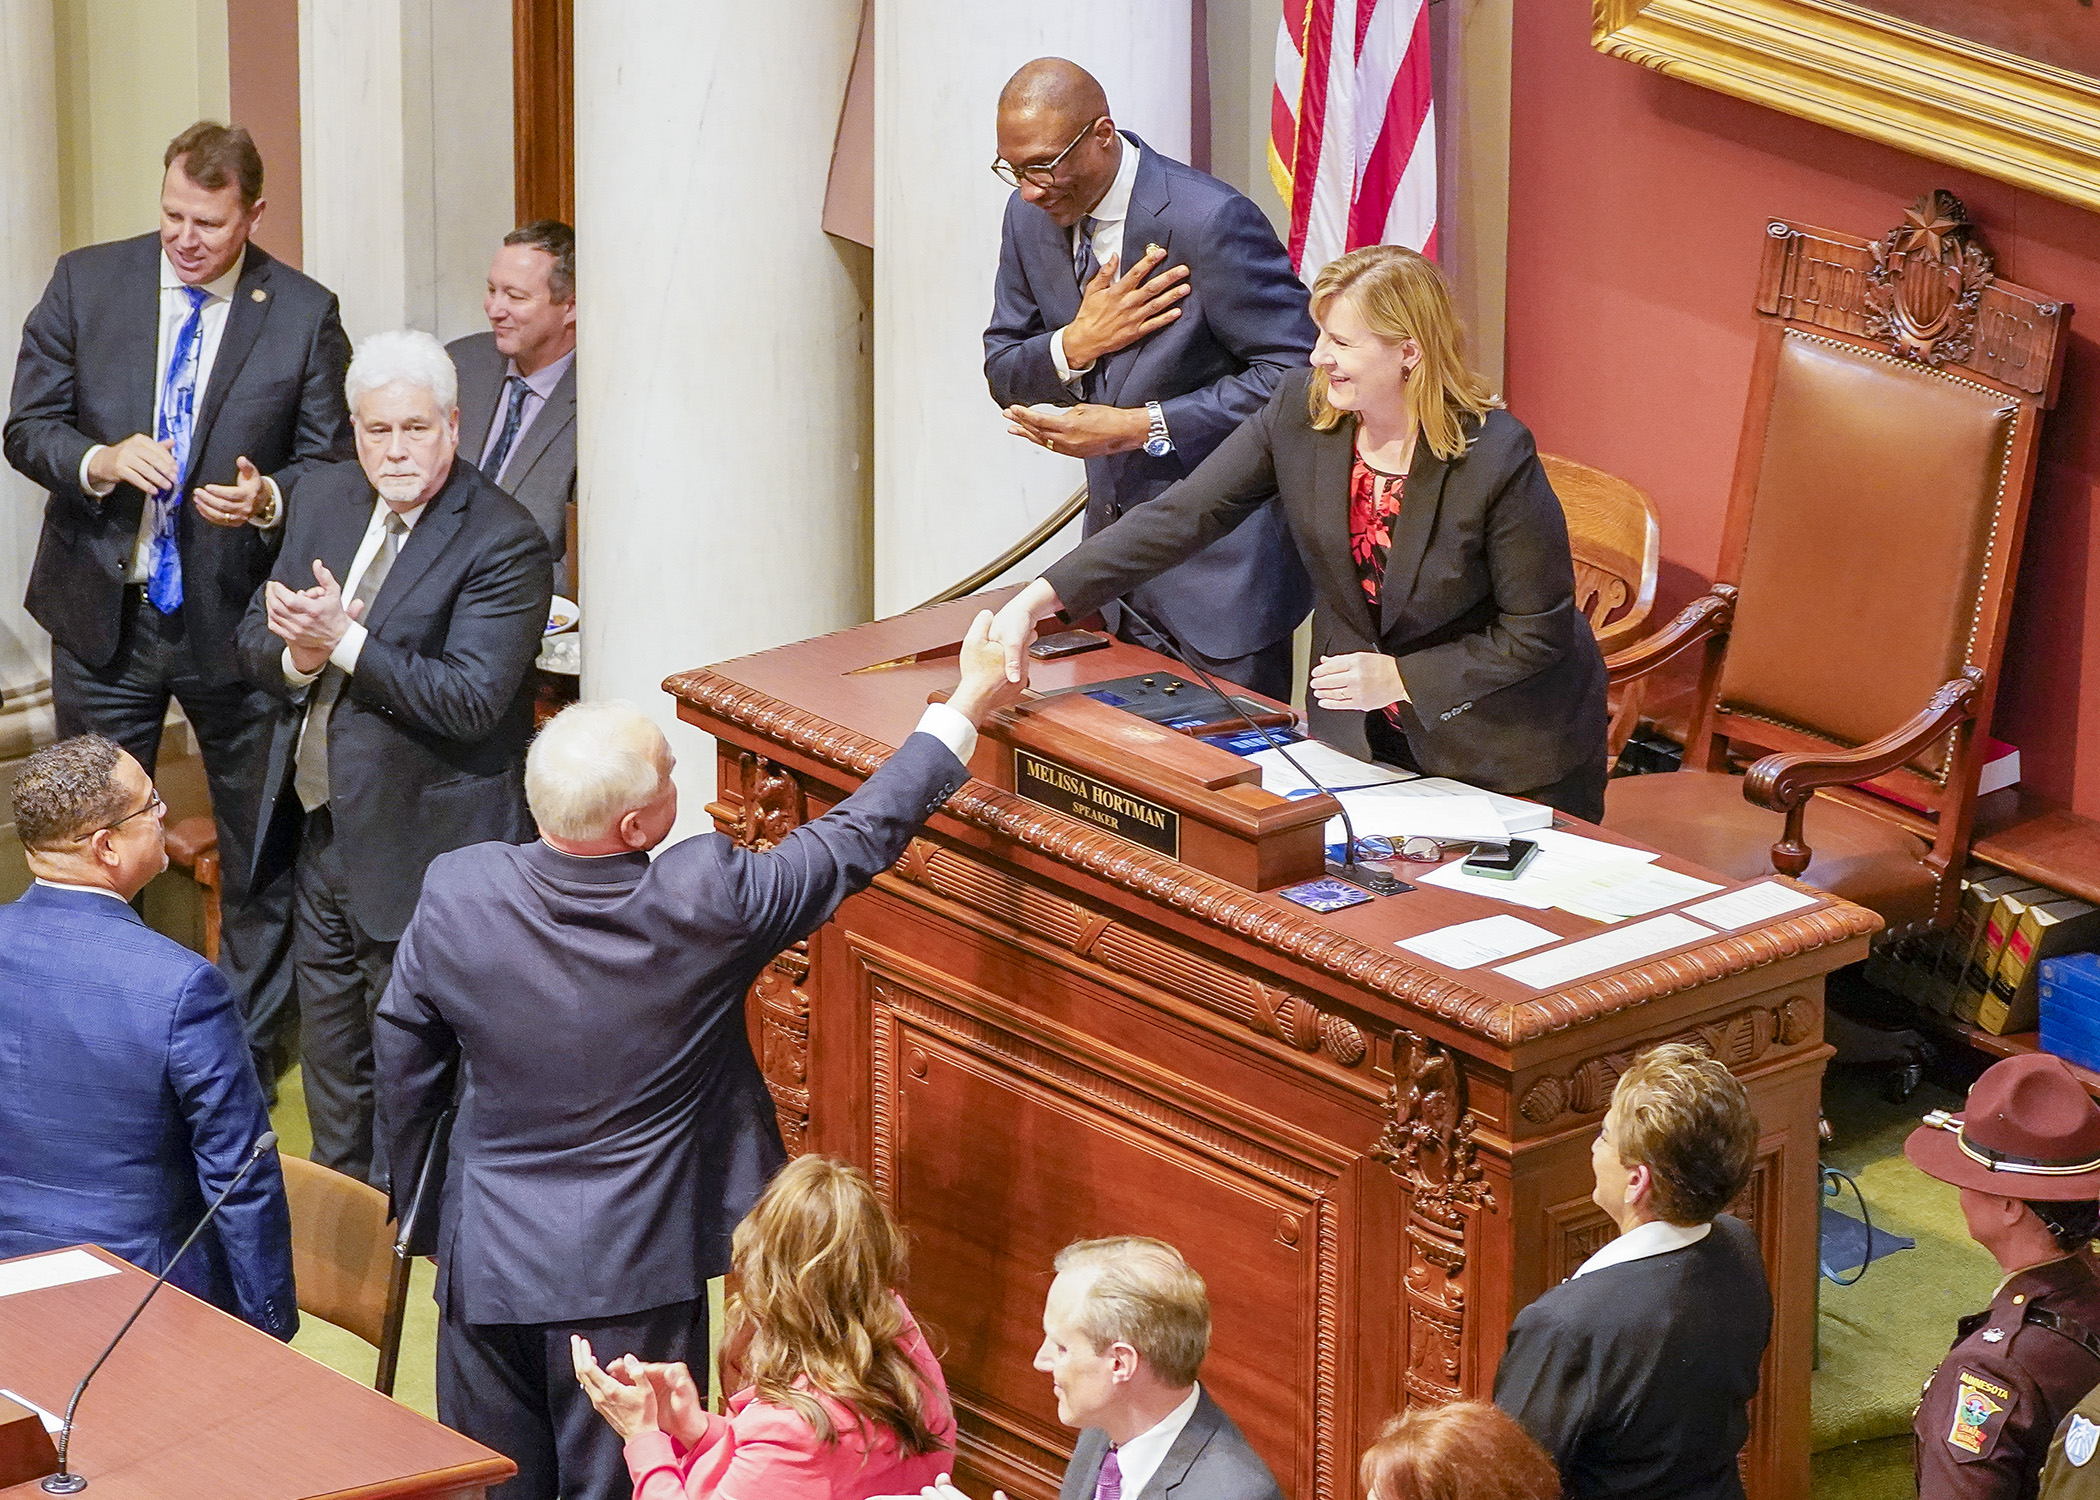 Gov. Tim Walz and House Speaker Melissa Hortman greet one another during the April 19 State of the State address. (Photo by Andrew VonBank)